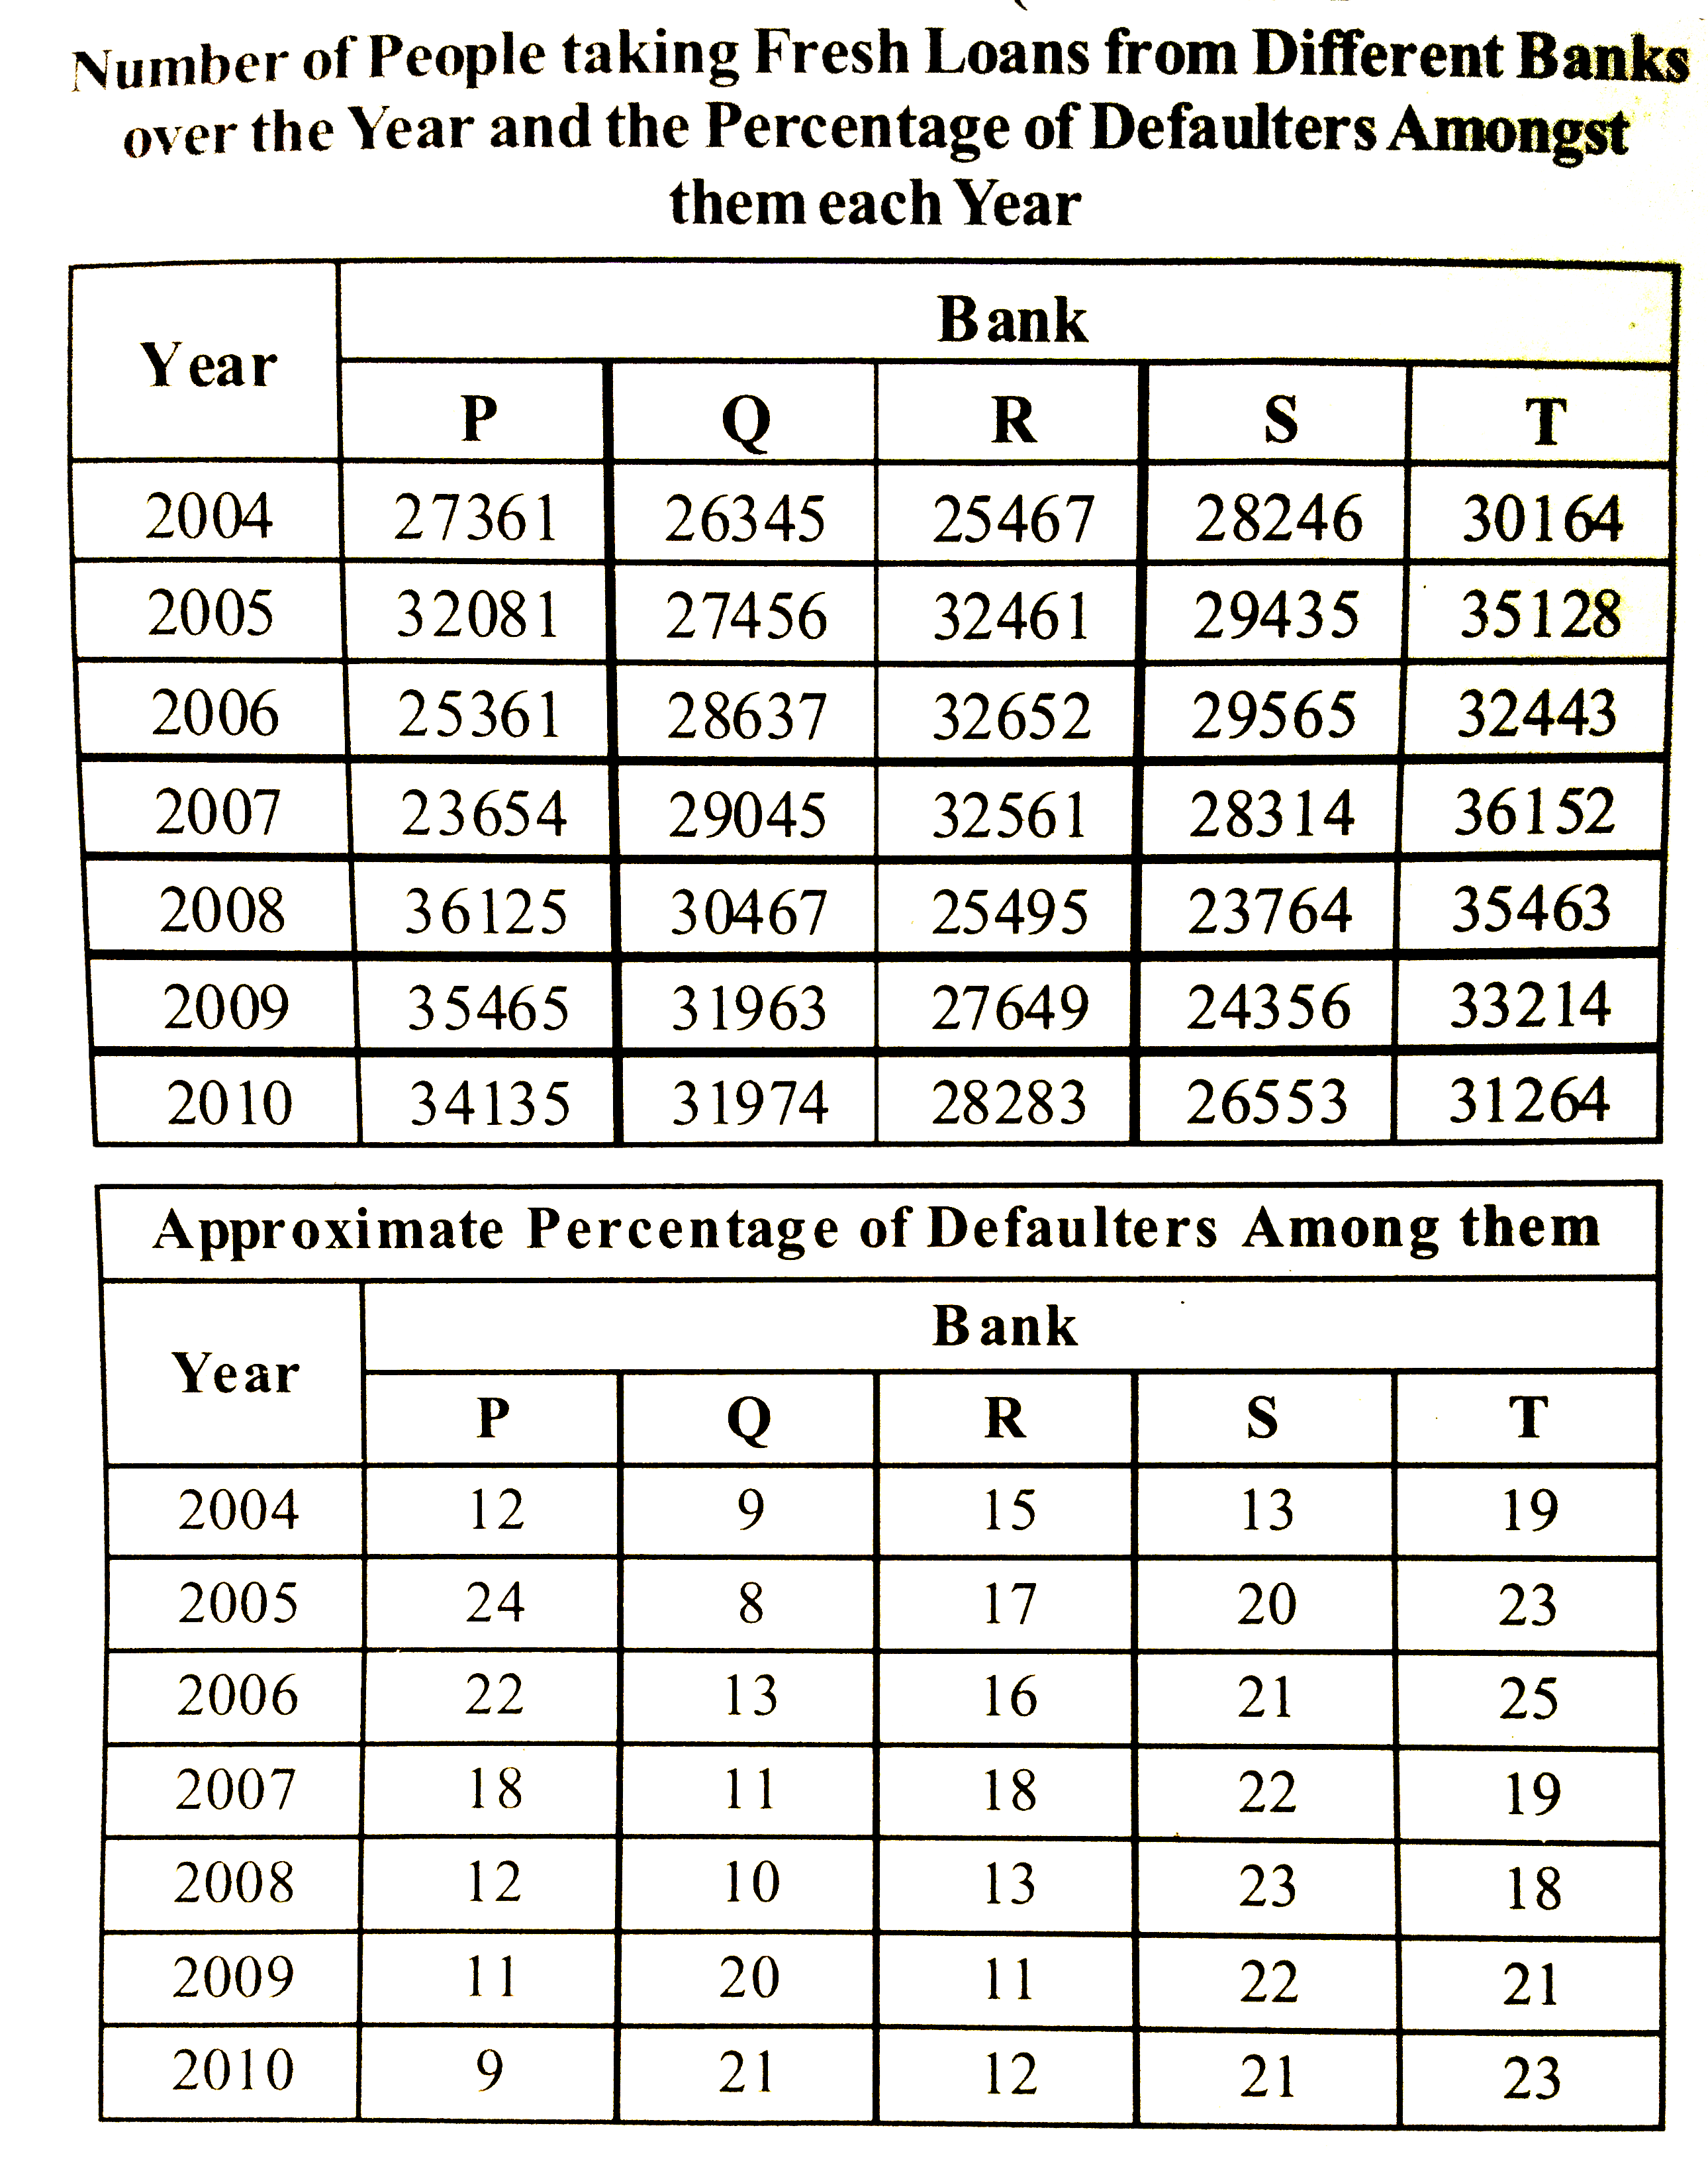 Approximately what was the total number of defaulters of Bank T in the years 2007 and 2008 together ?